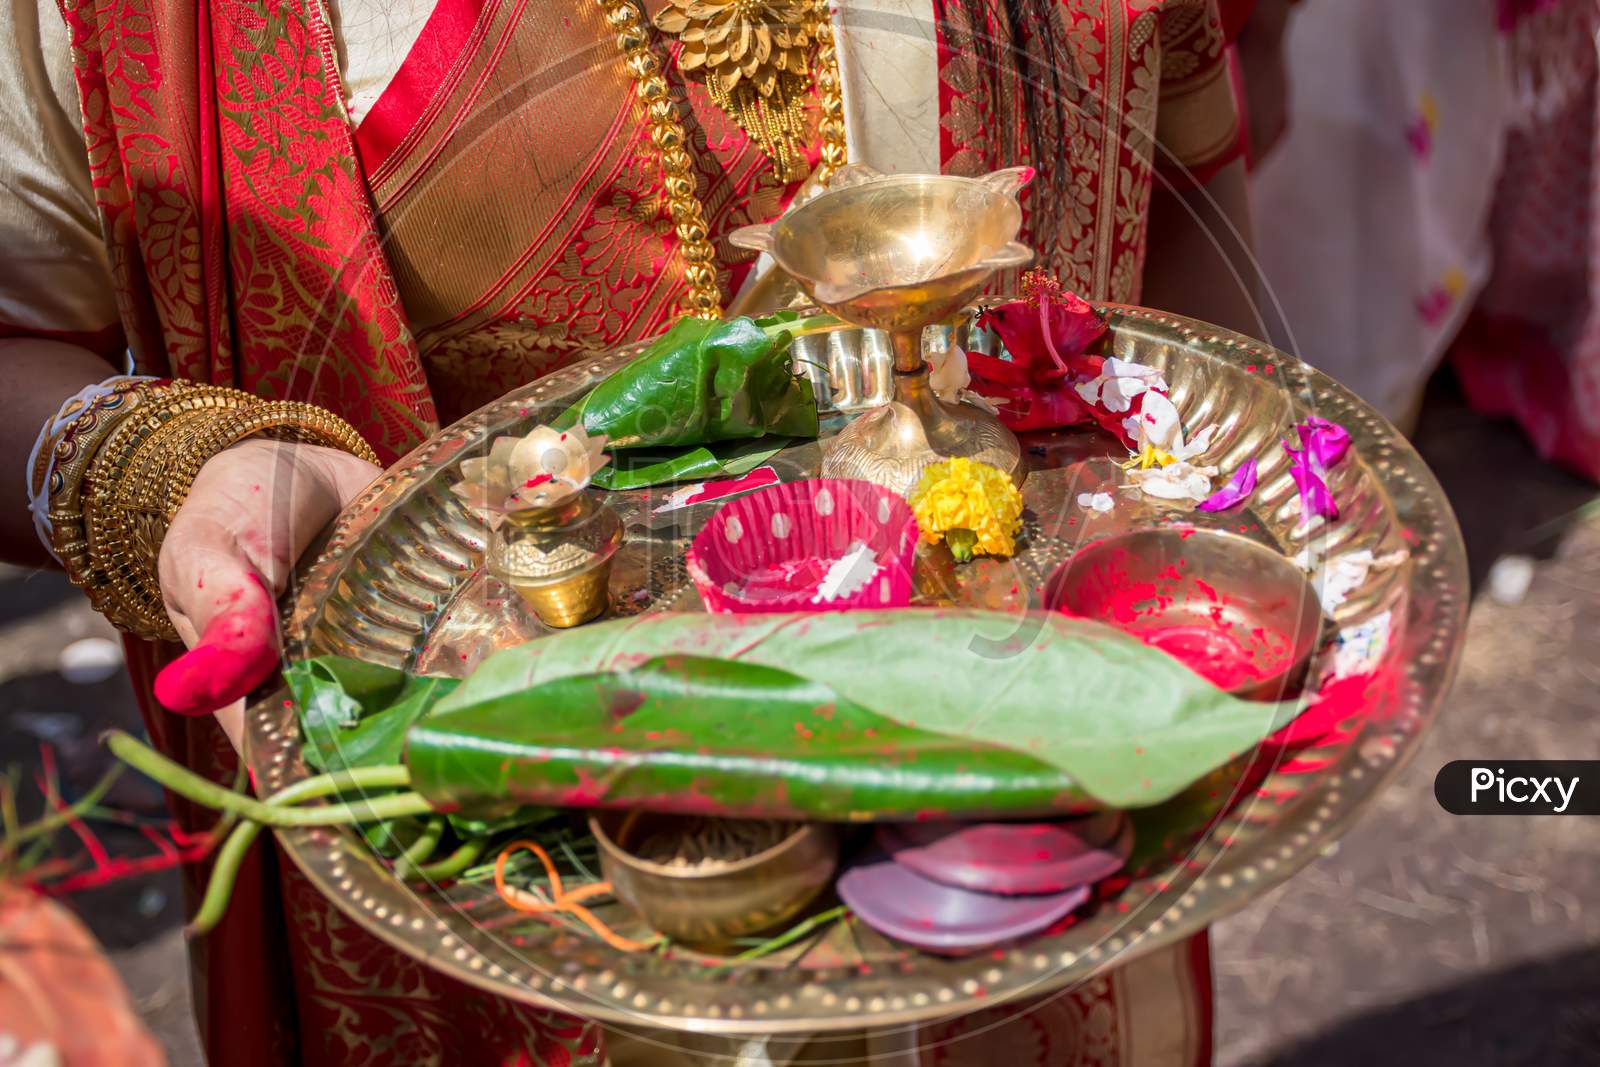 A Women Holding A Borondala (Pooja Thali For Worshipping God) In Sindur Khela At A Puja Pandal On The Last Day Of Durga Puja.